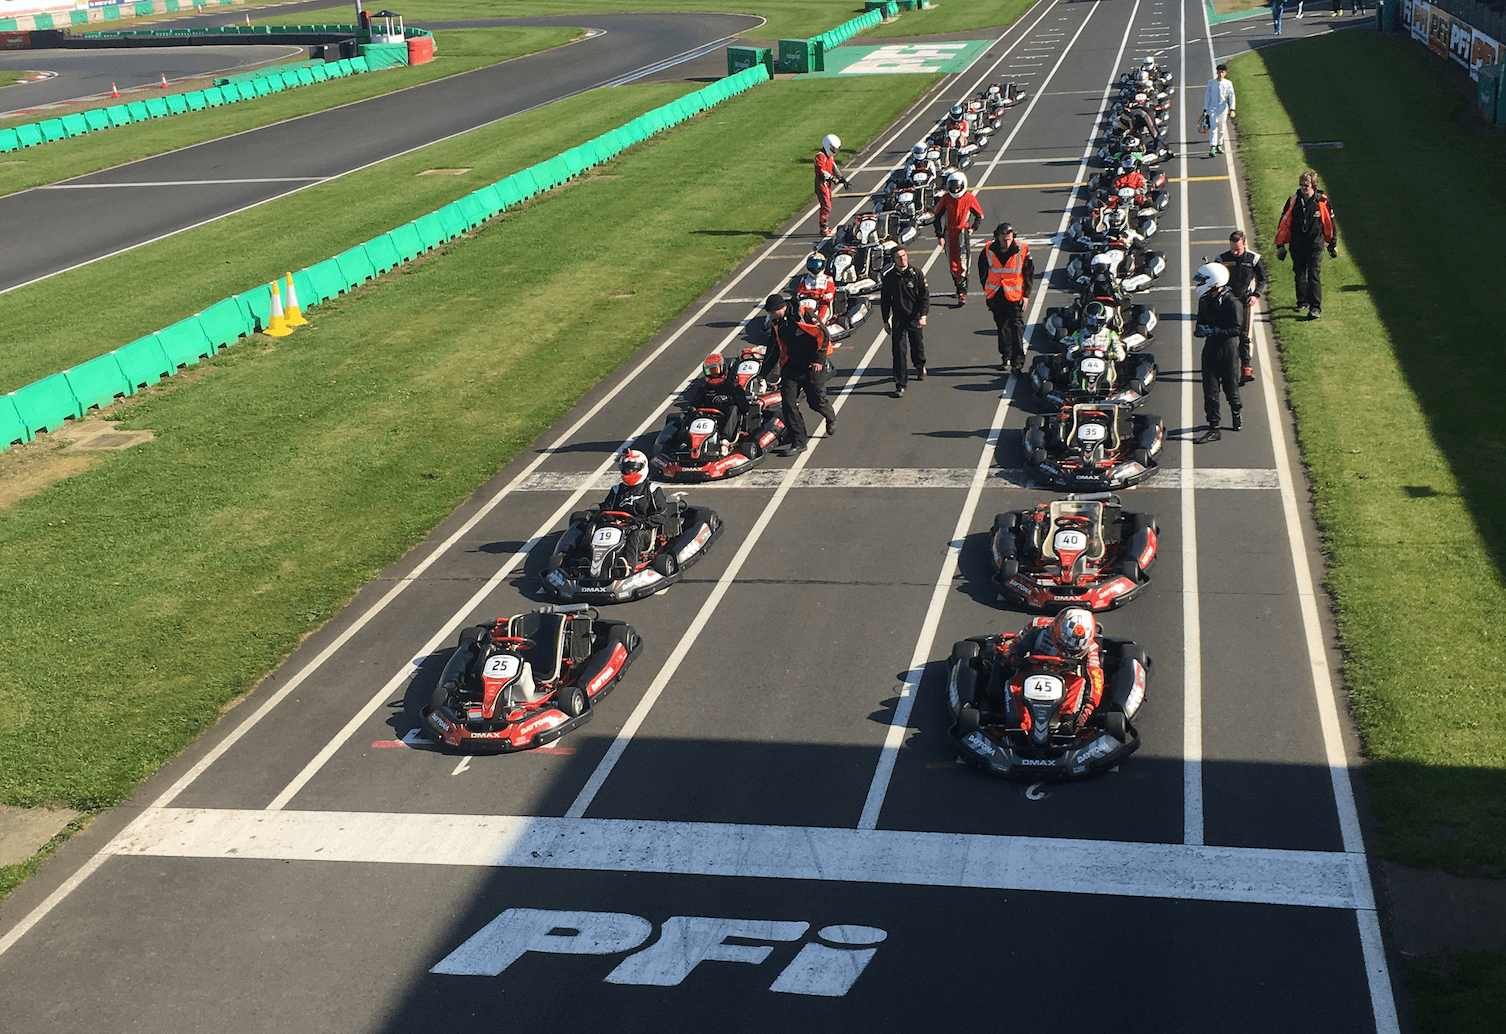 Amazing Racing at PF for Round 3